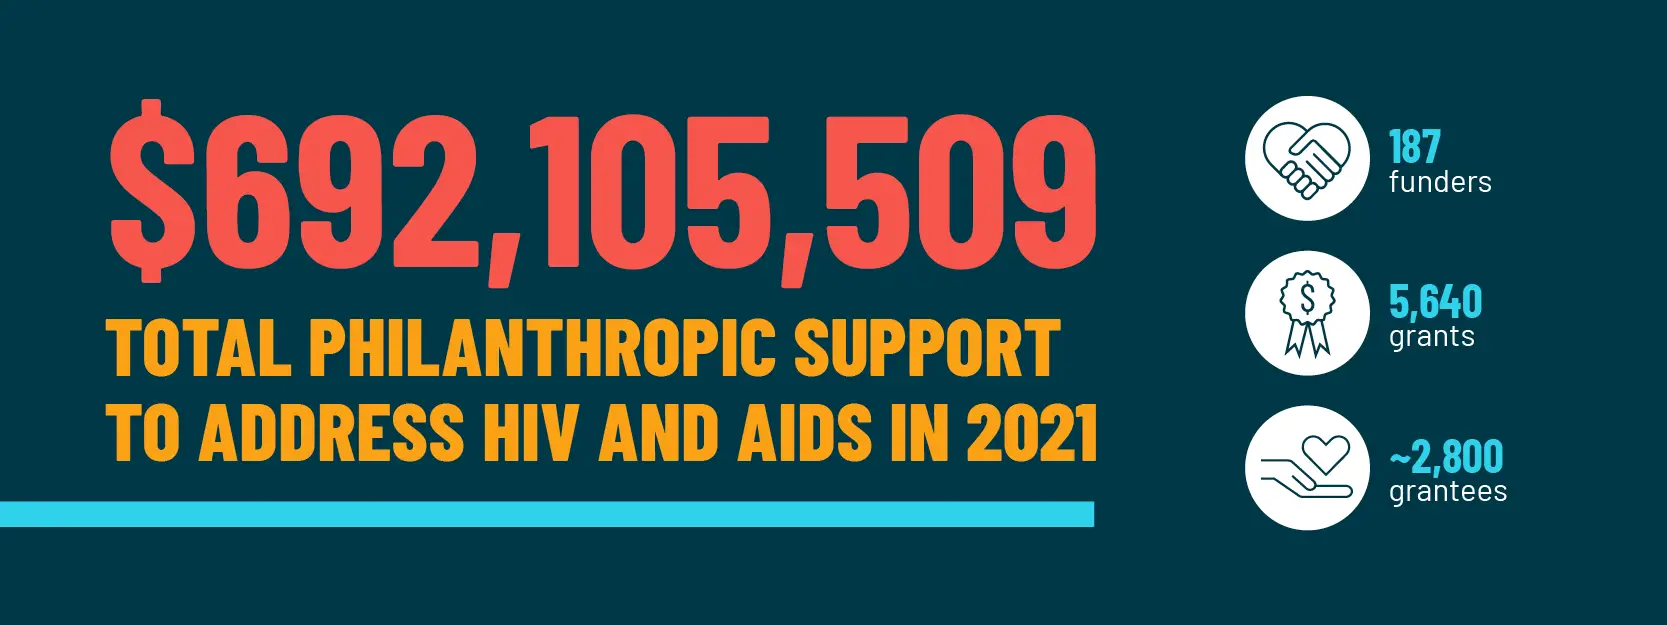 $692,105,509 Total Philanthropic Support to Address HIV and AIDS in 2021